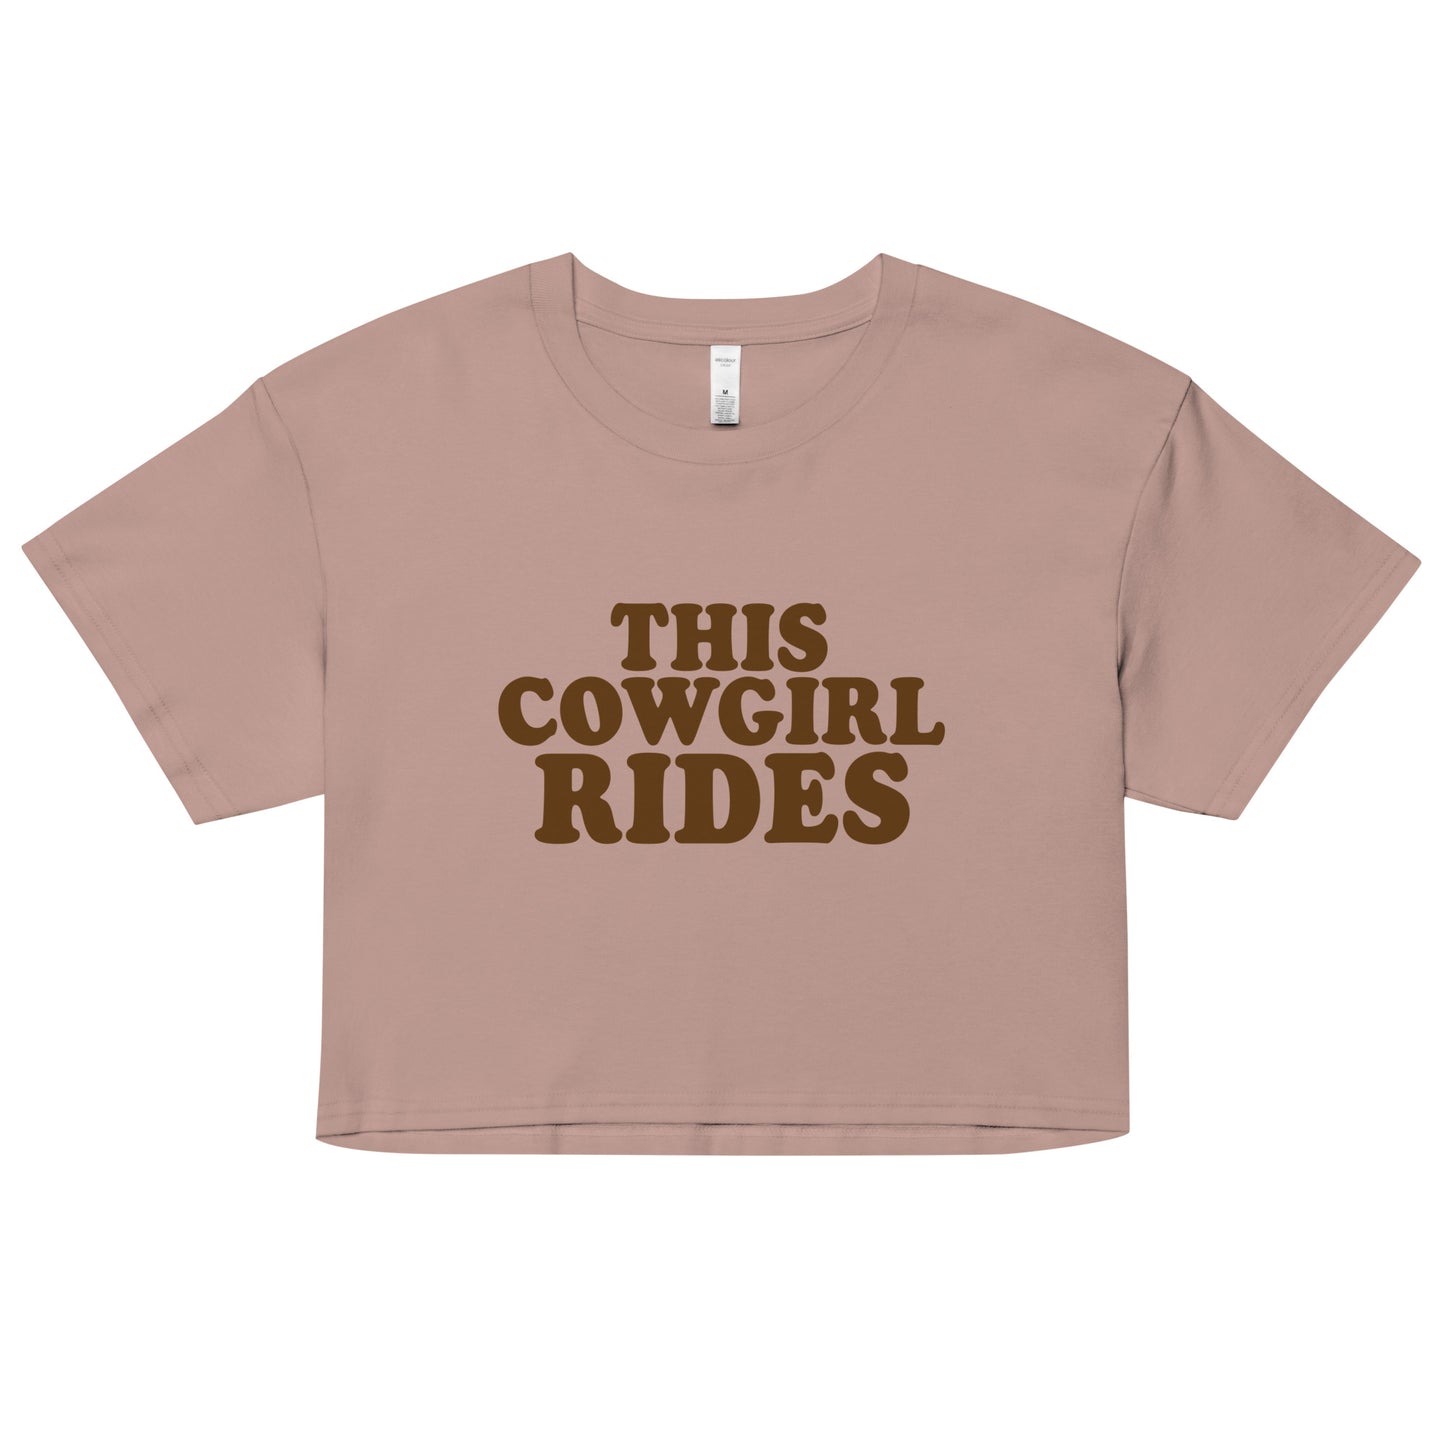 THIS COWGIRL RIDES babytee